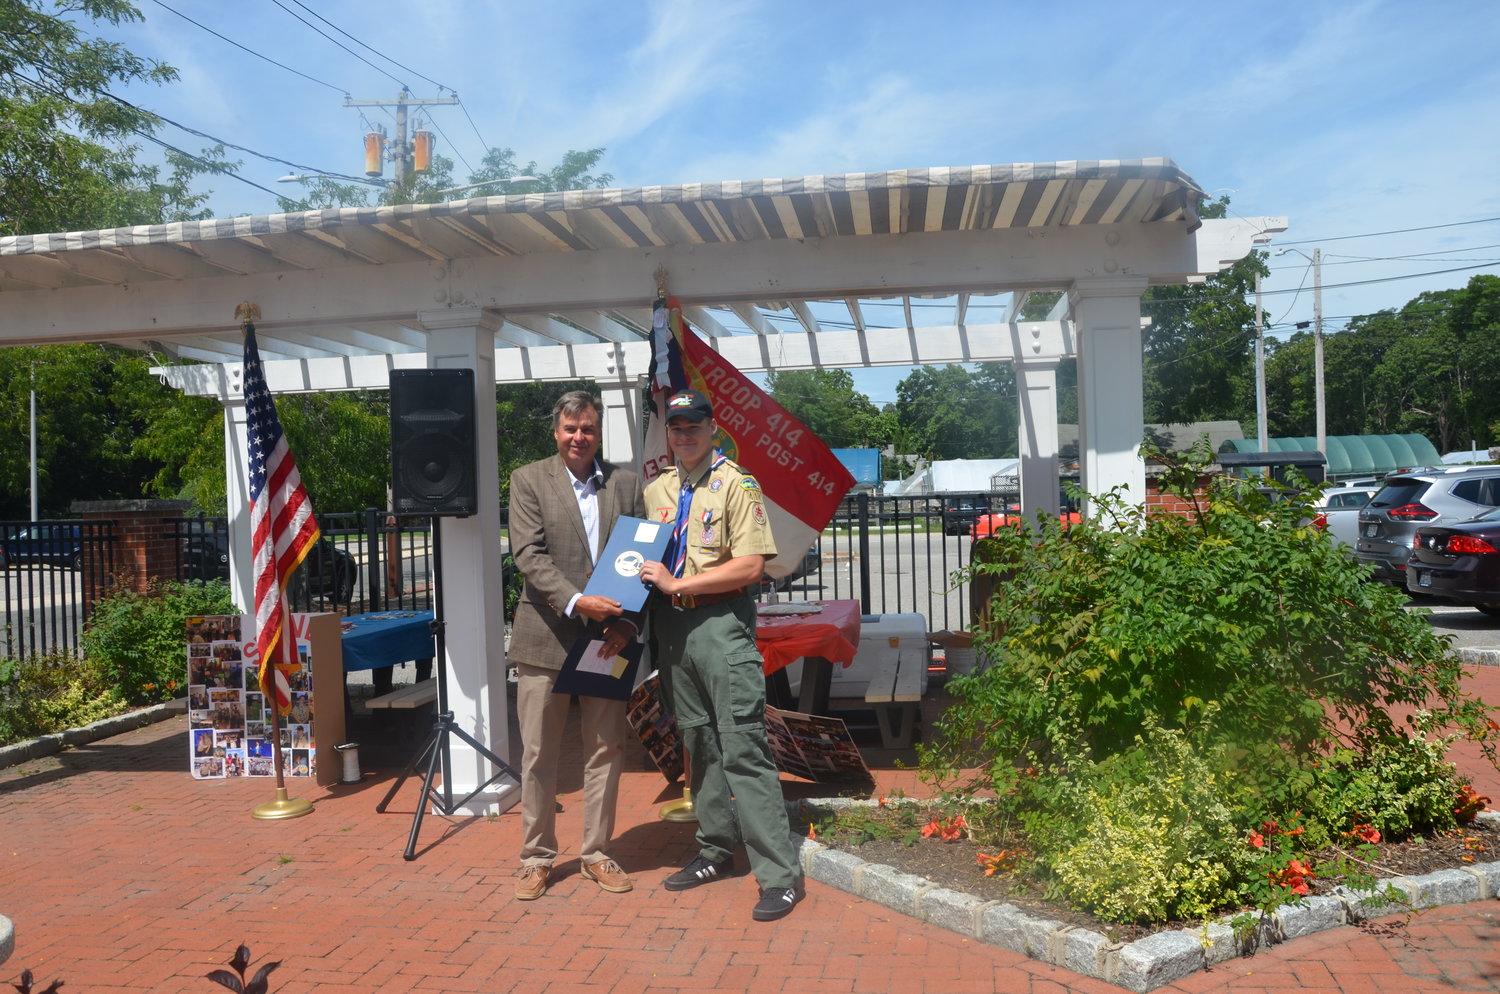 Eagle Scout Steven Rosche is presented with a citation from Suffolk County Legis. Al Krupski.